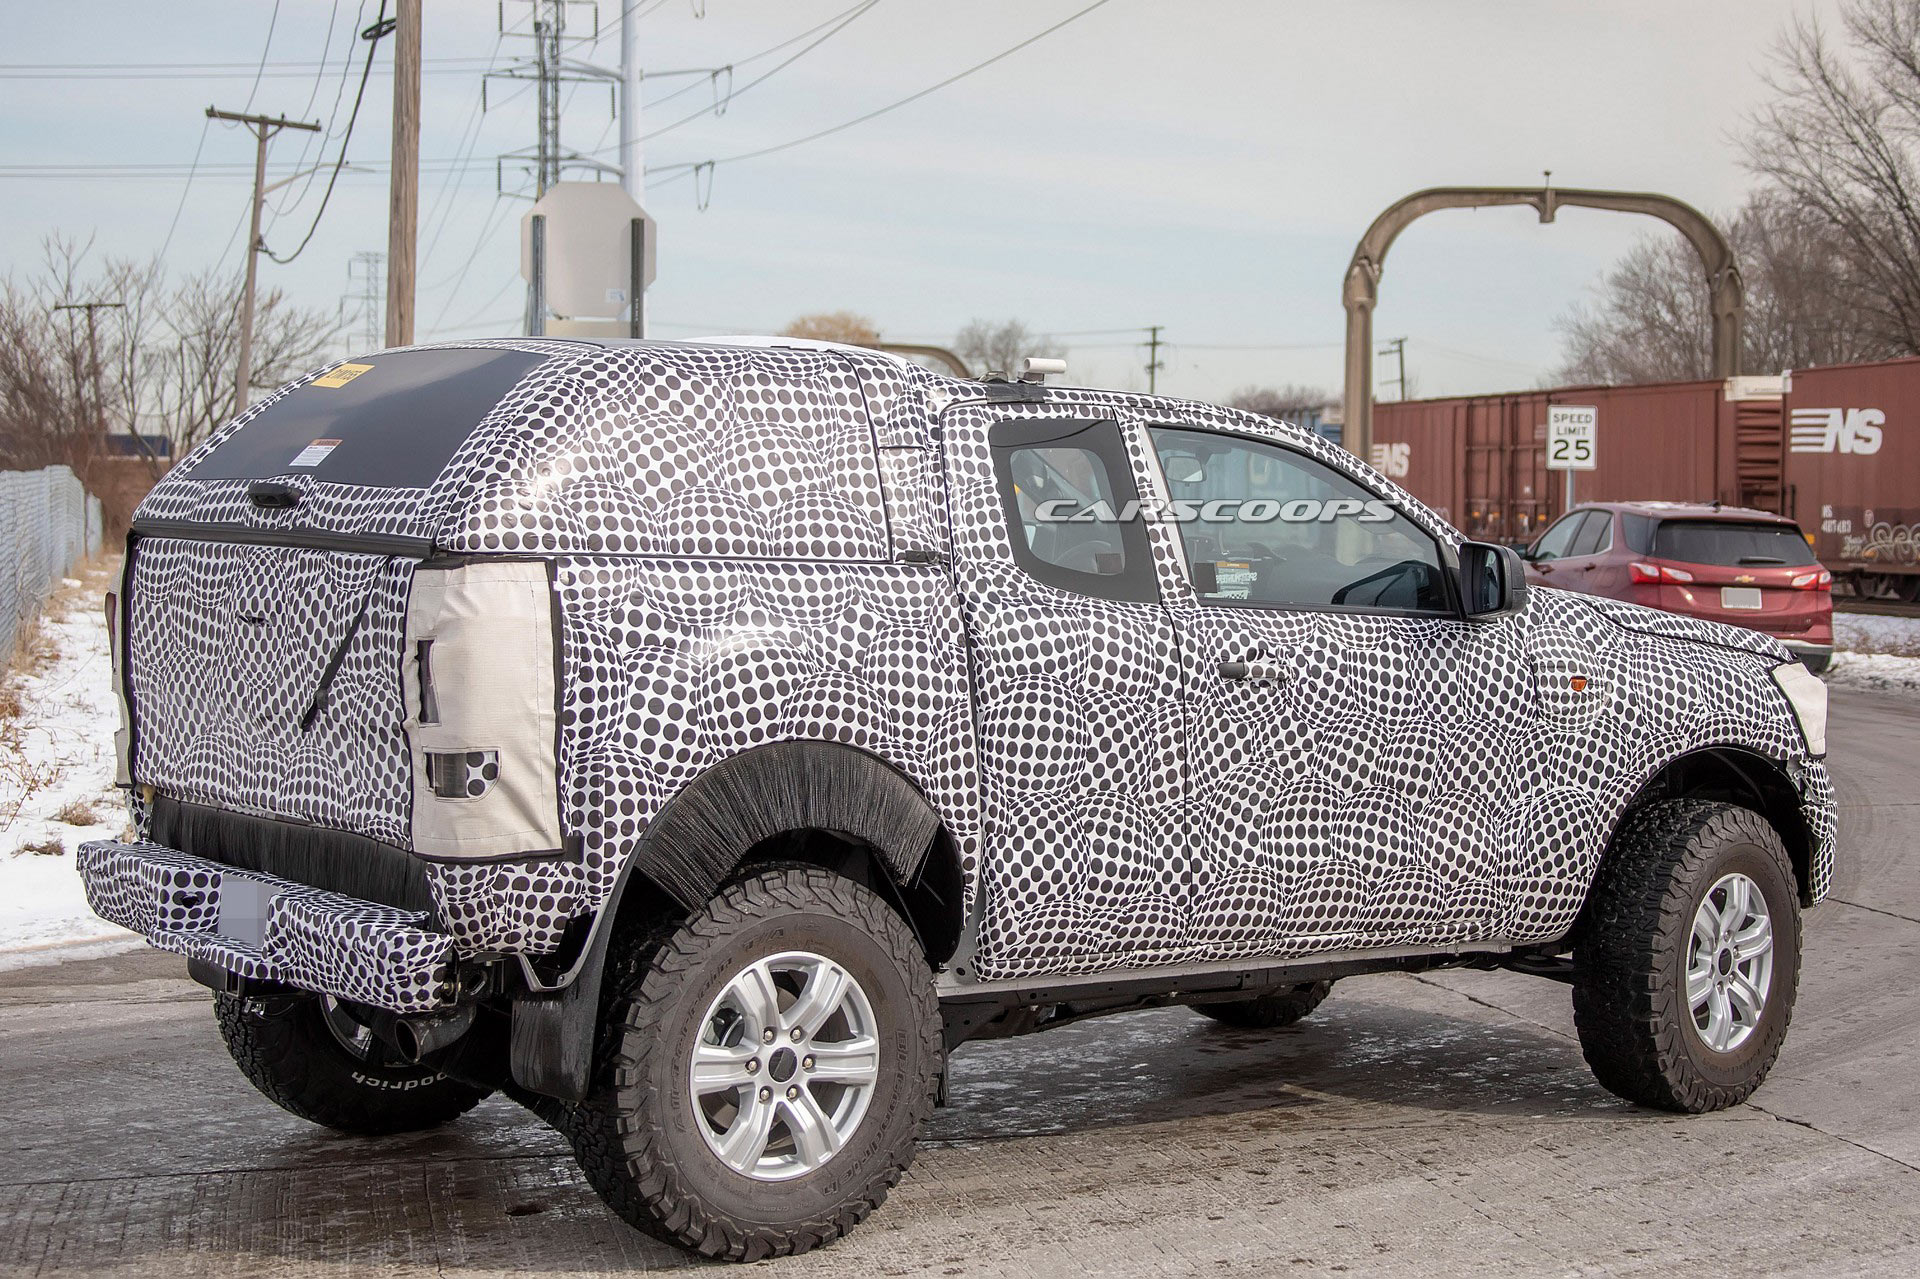 2020 Ford Bronco Mule Possibly Spied Looks Pretty Hardcore Carscoops